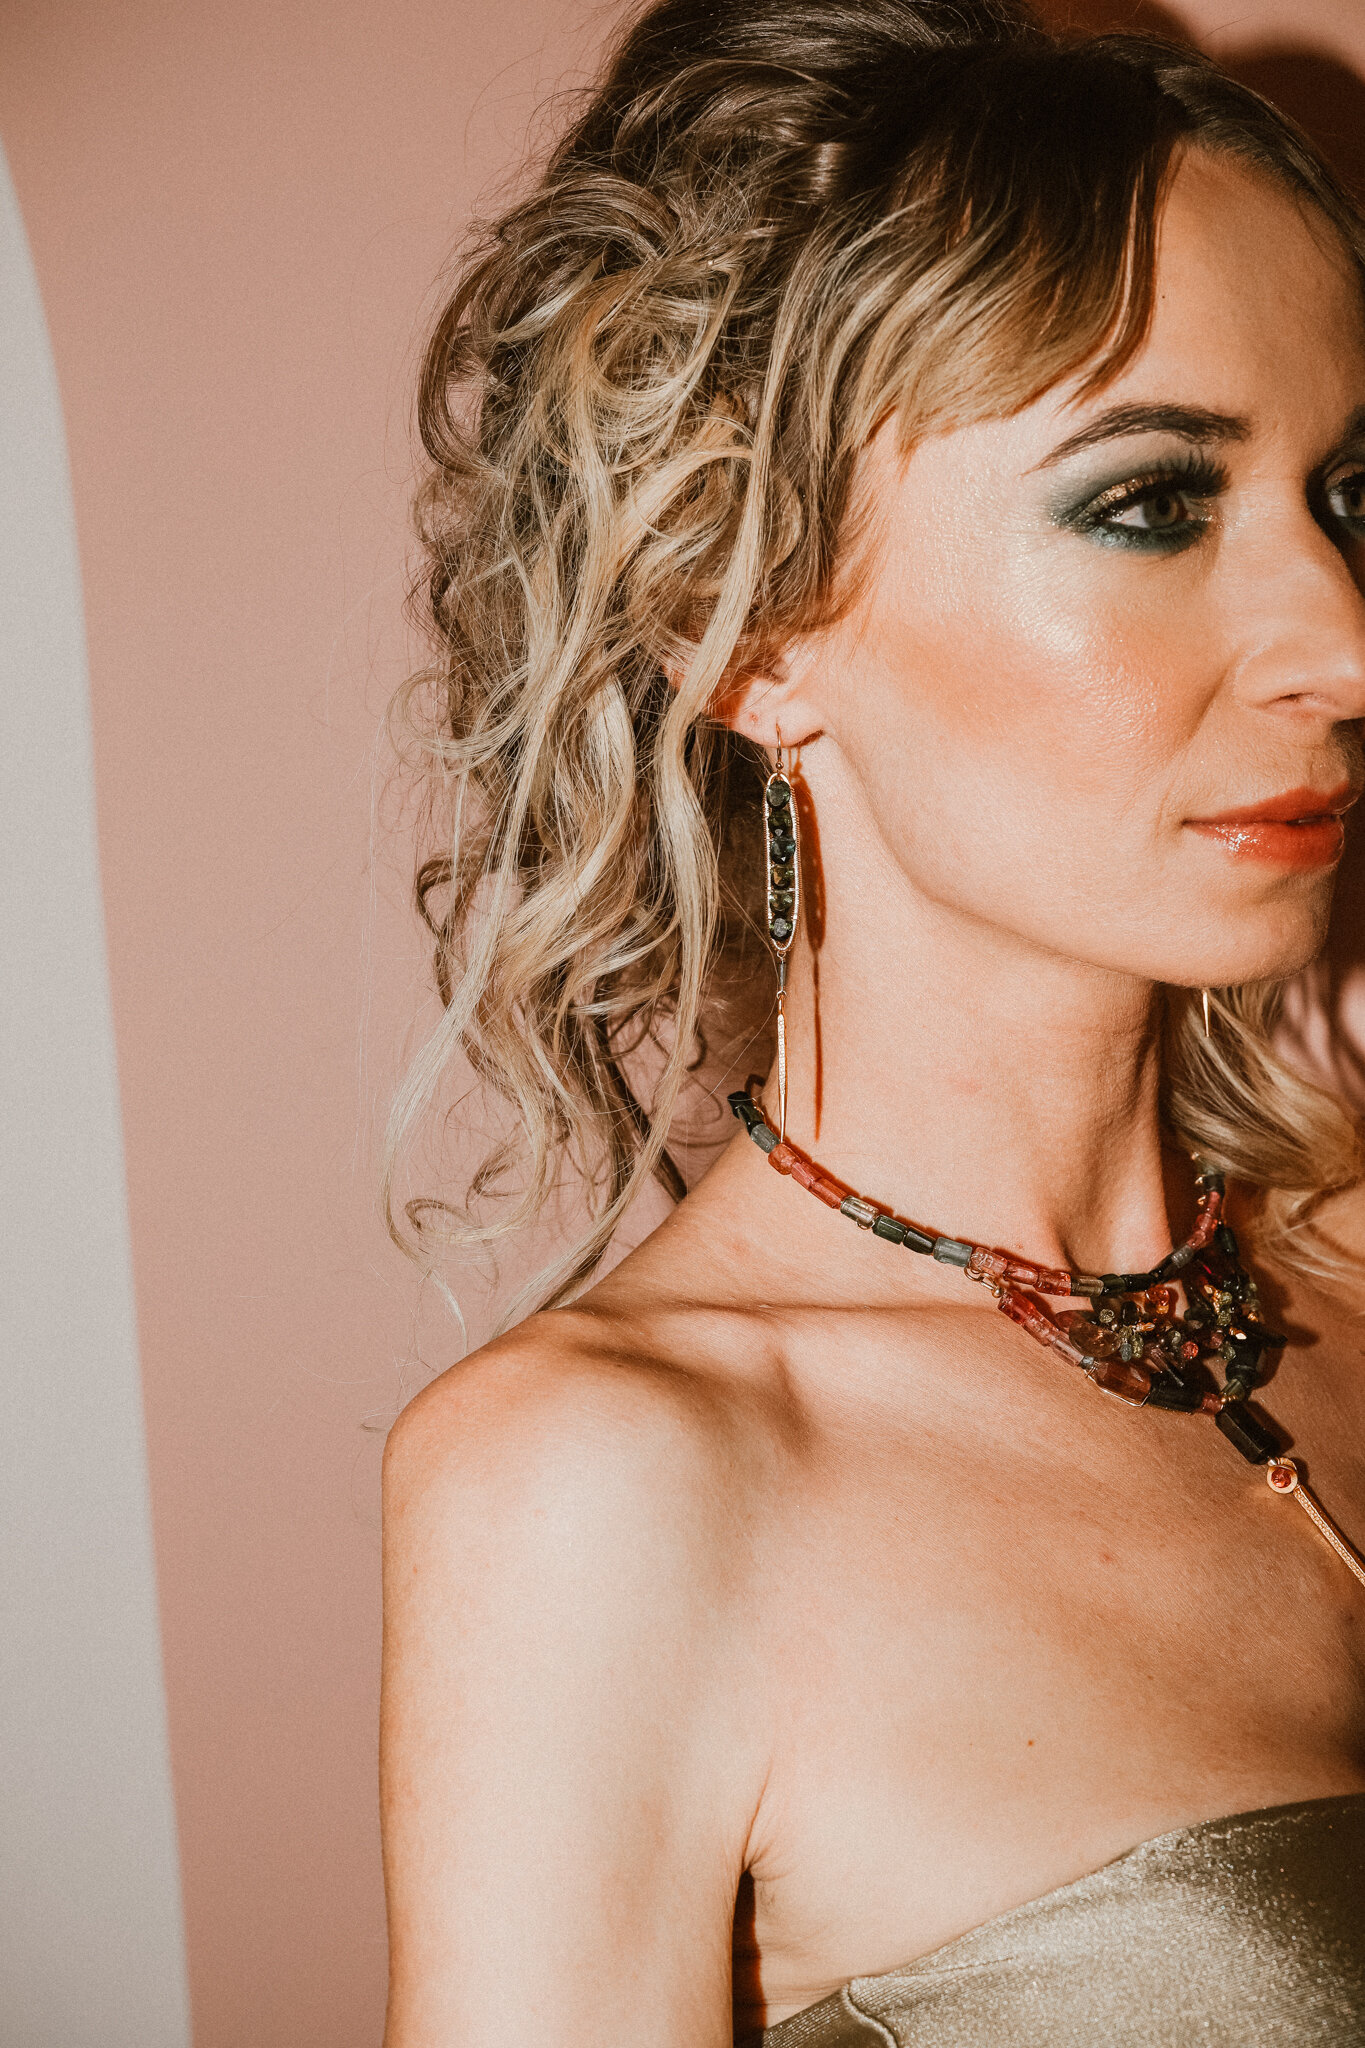 model wearing a Tourmaline Collar Necklace